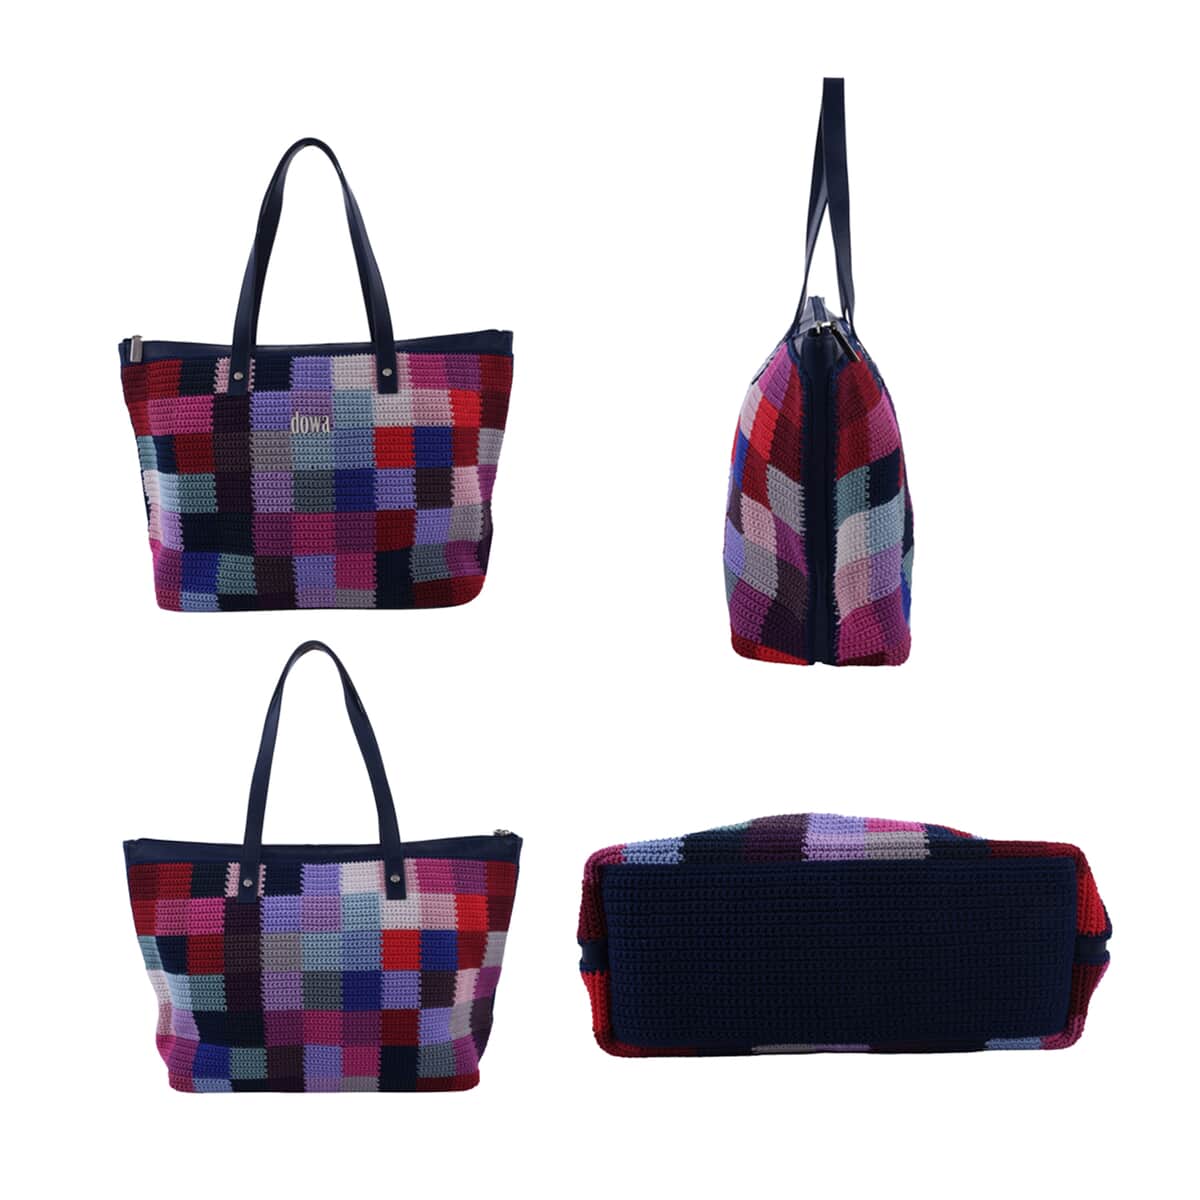 DOWA Multi Color Indigo 100% Nylon with Leather Handwoven Tote Bag image number 1